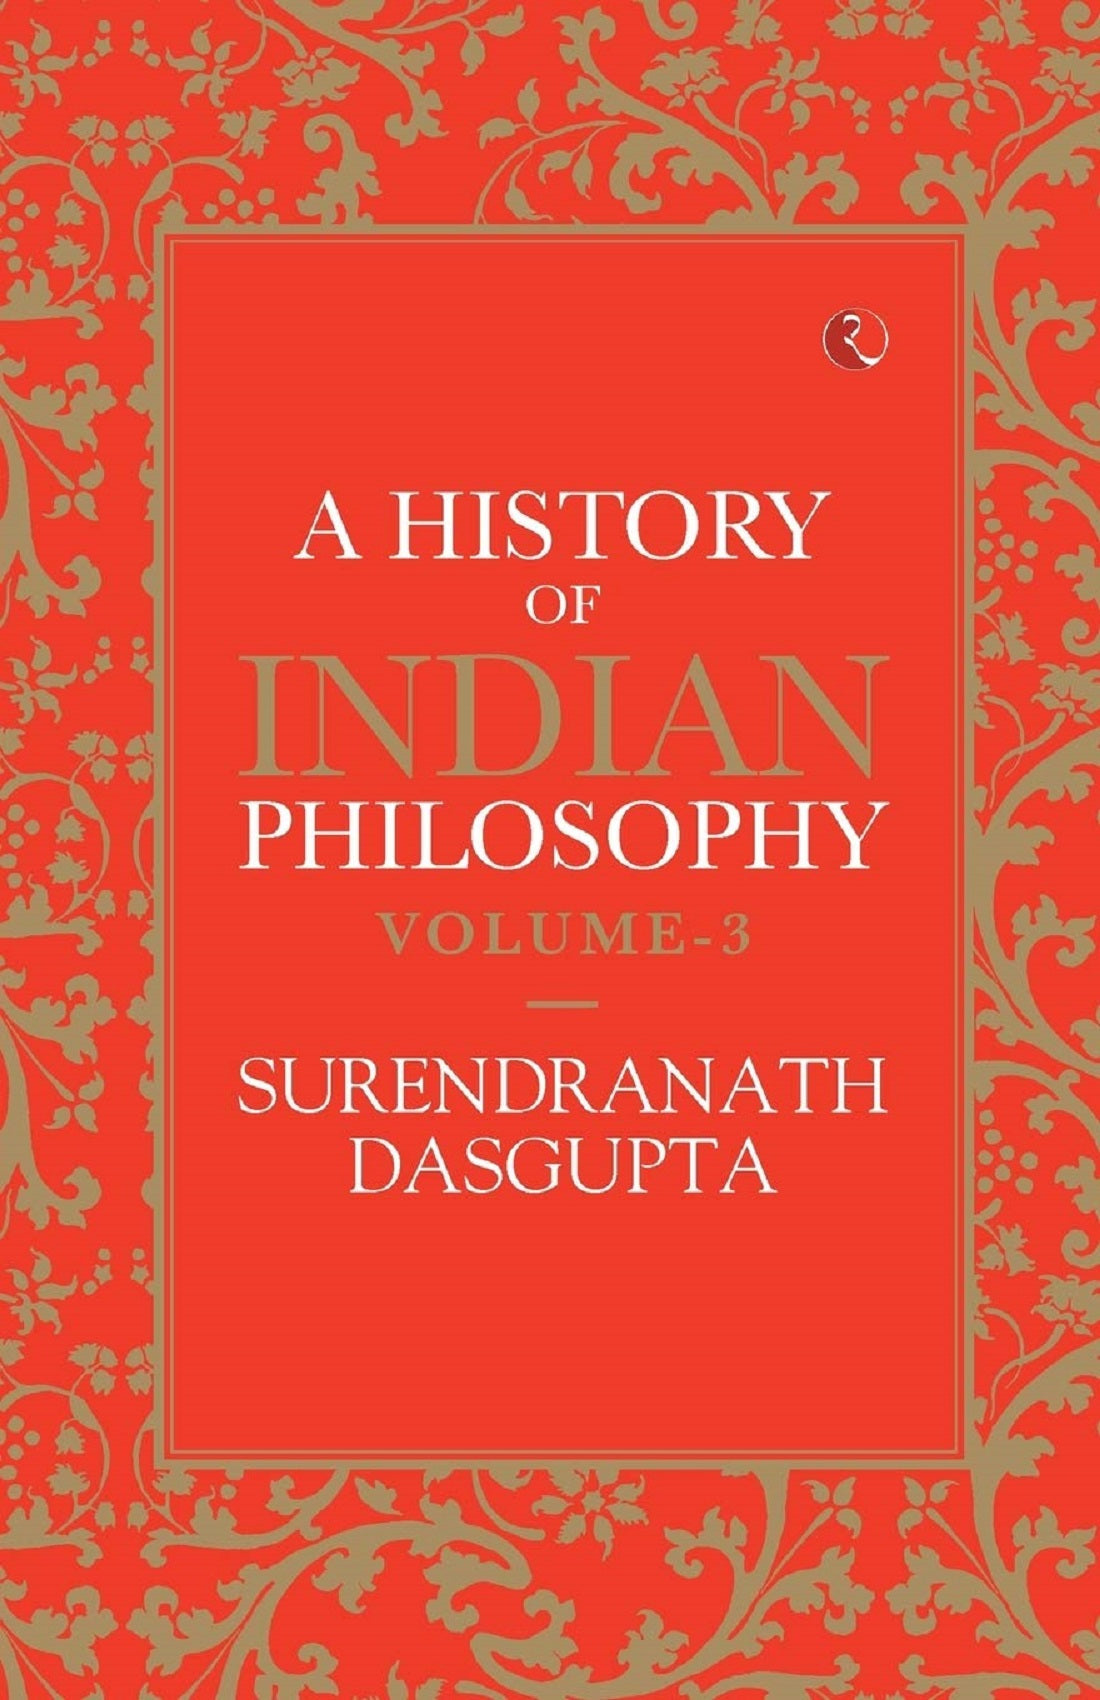 A HISTORY OF INDIAN PHILOSOPHY VOL 3